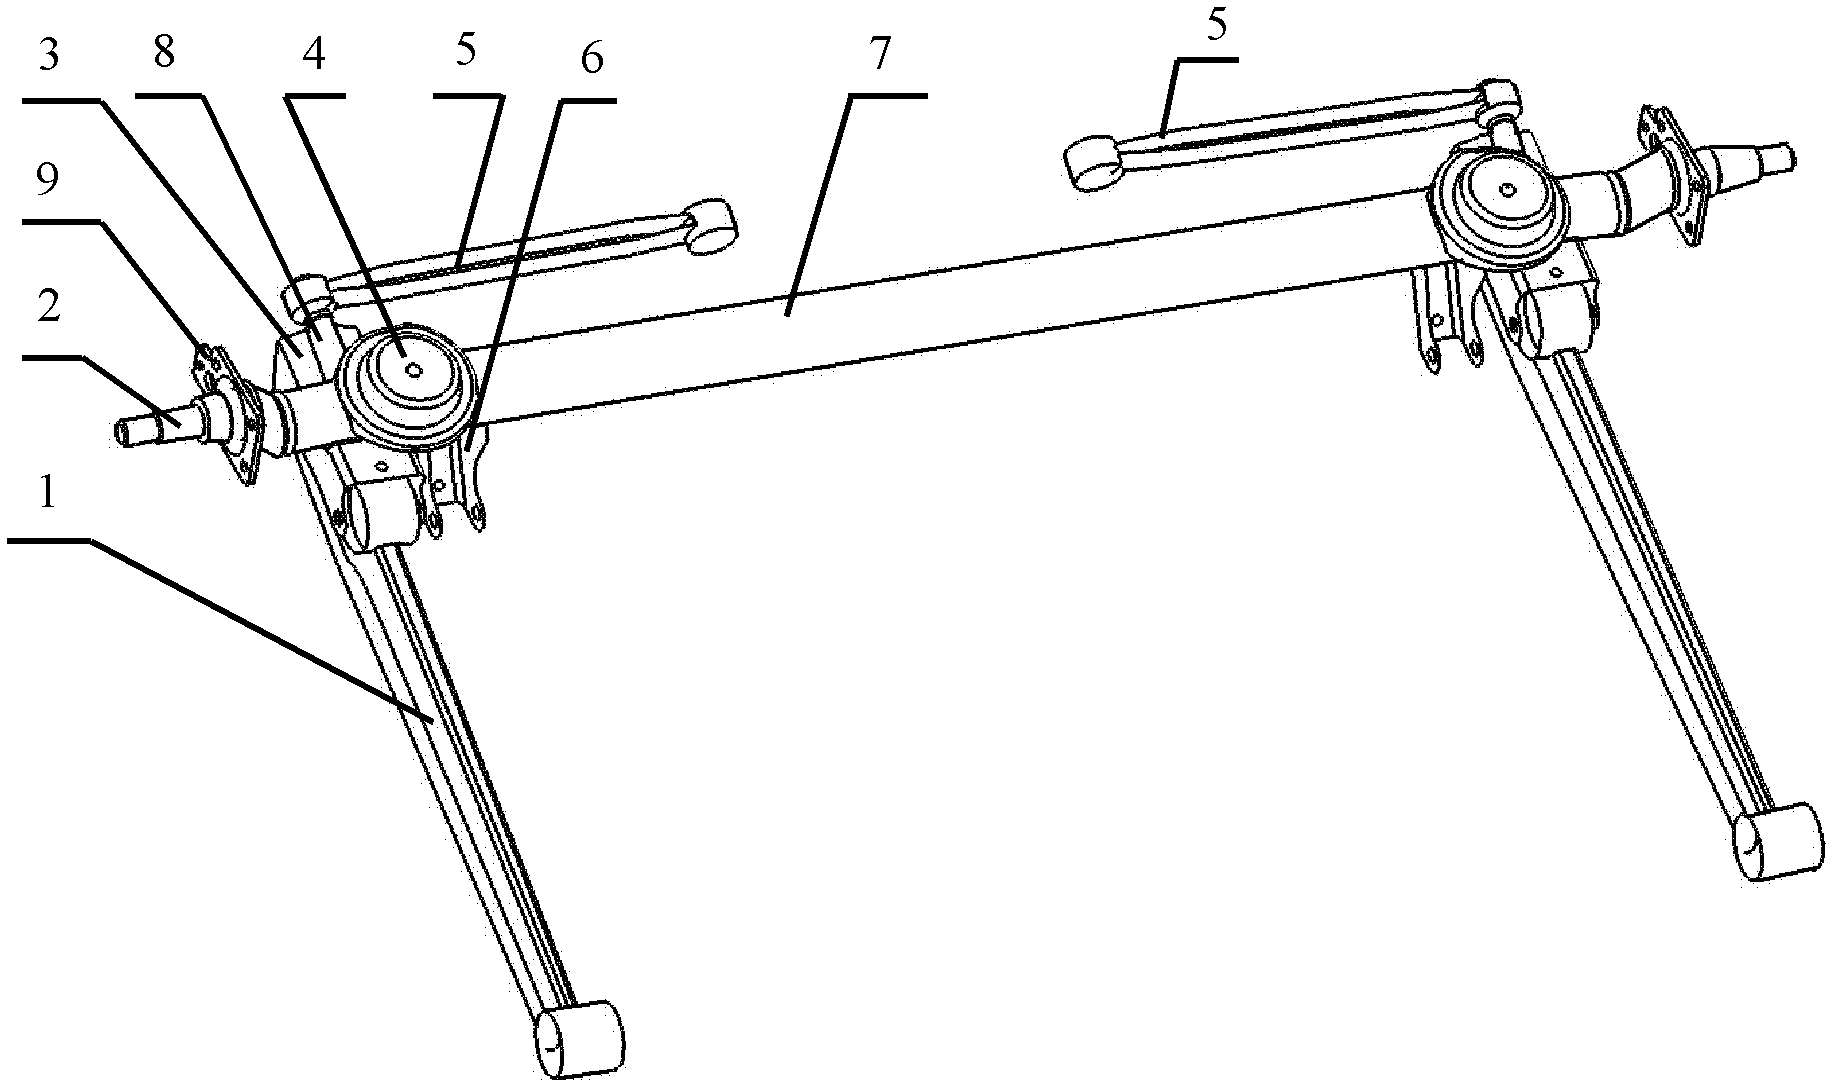 Trailing arm suspending frame with double-transverse stay bar structure